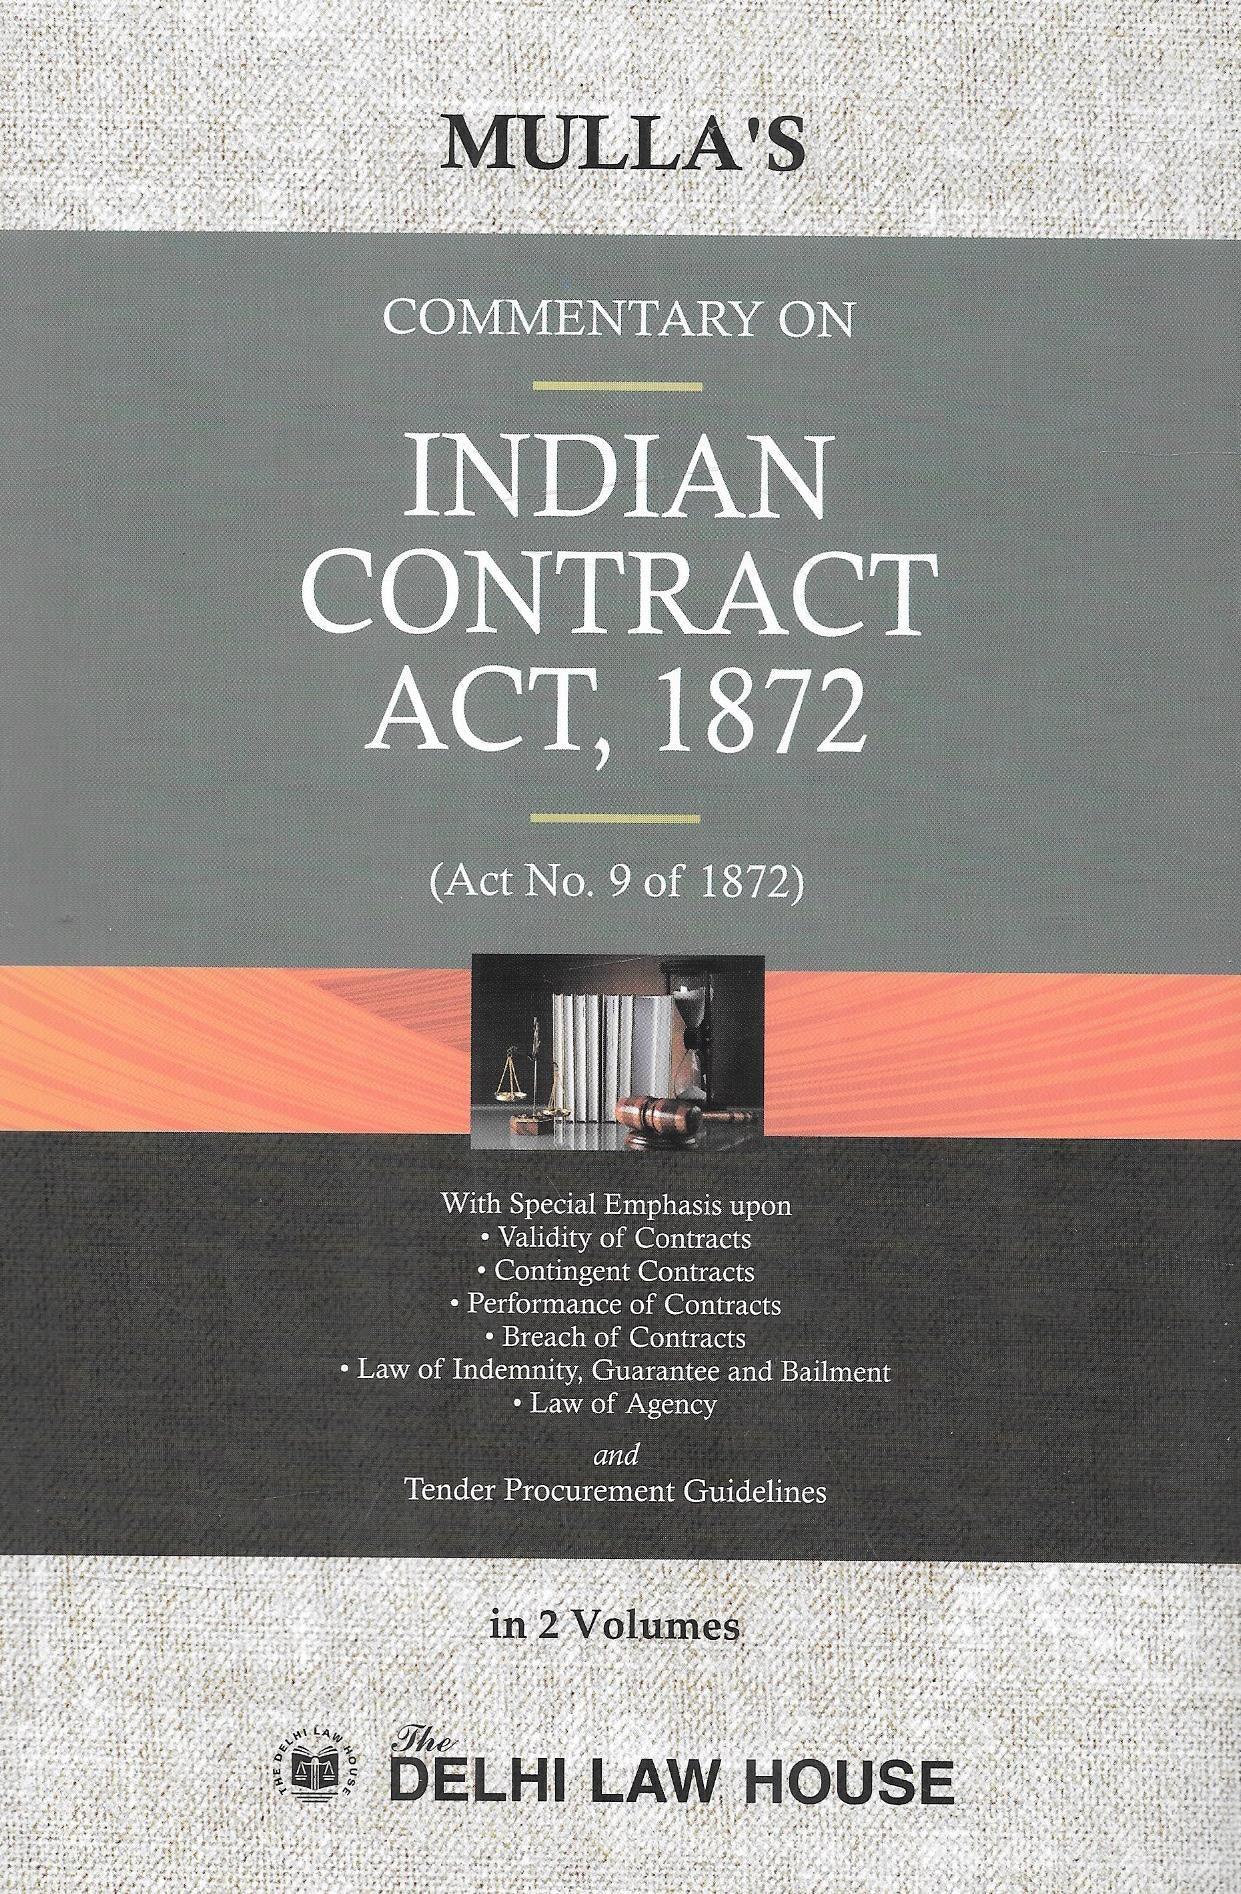 Commentary on The Indian Contract Act, 1872 in 2 vols